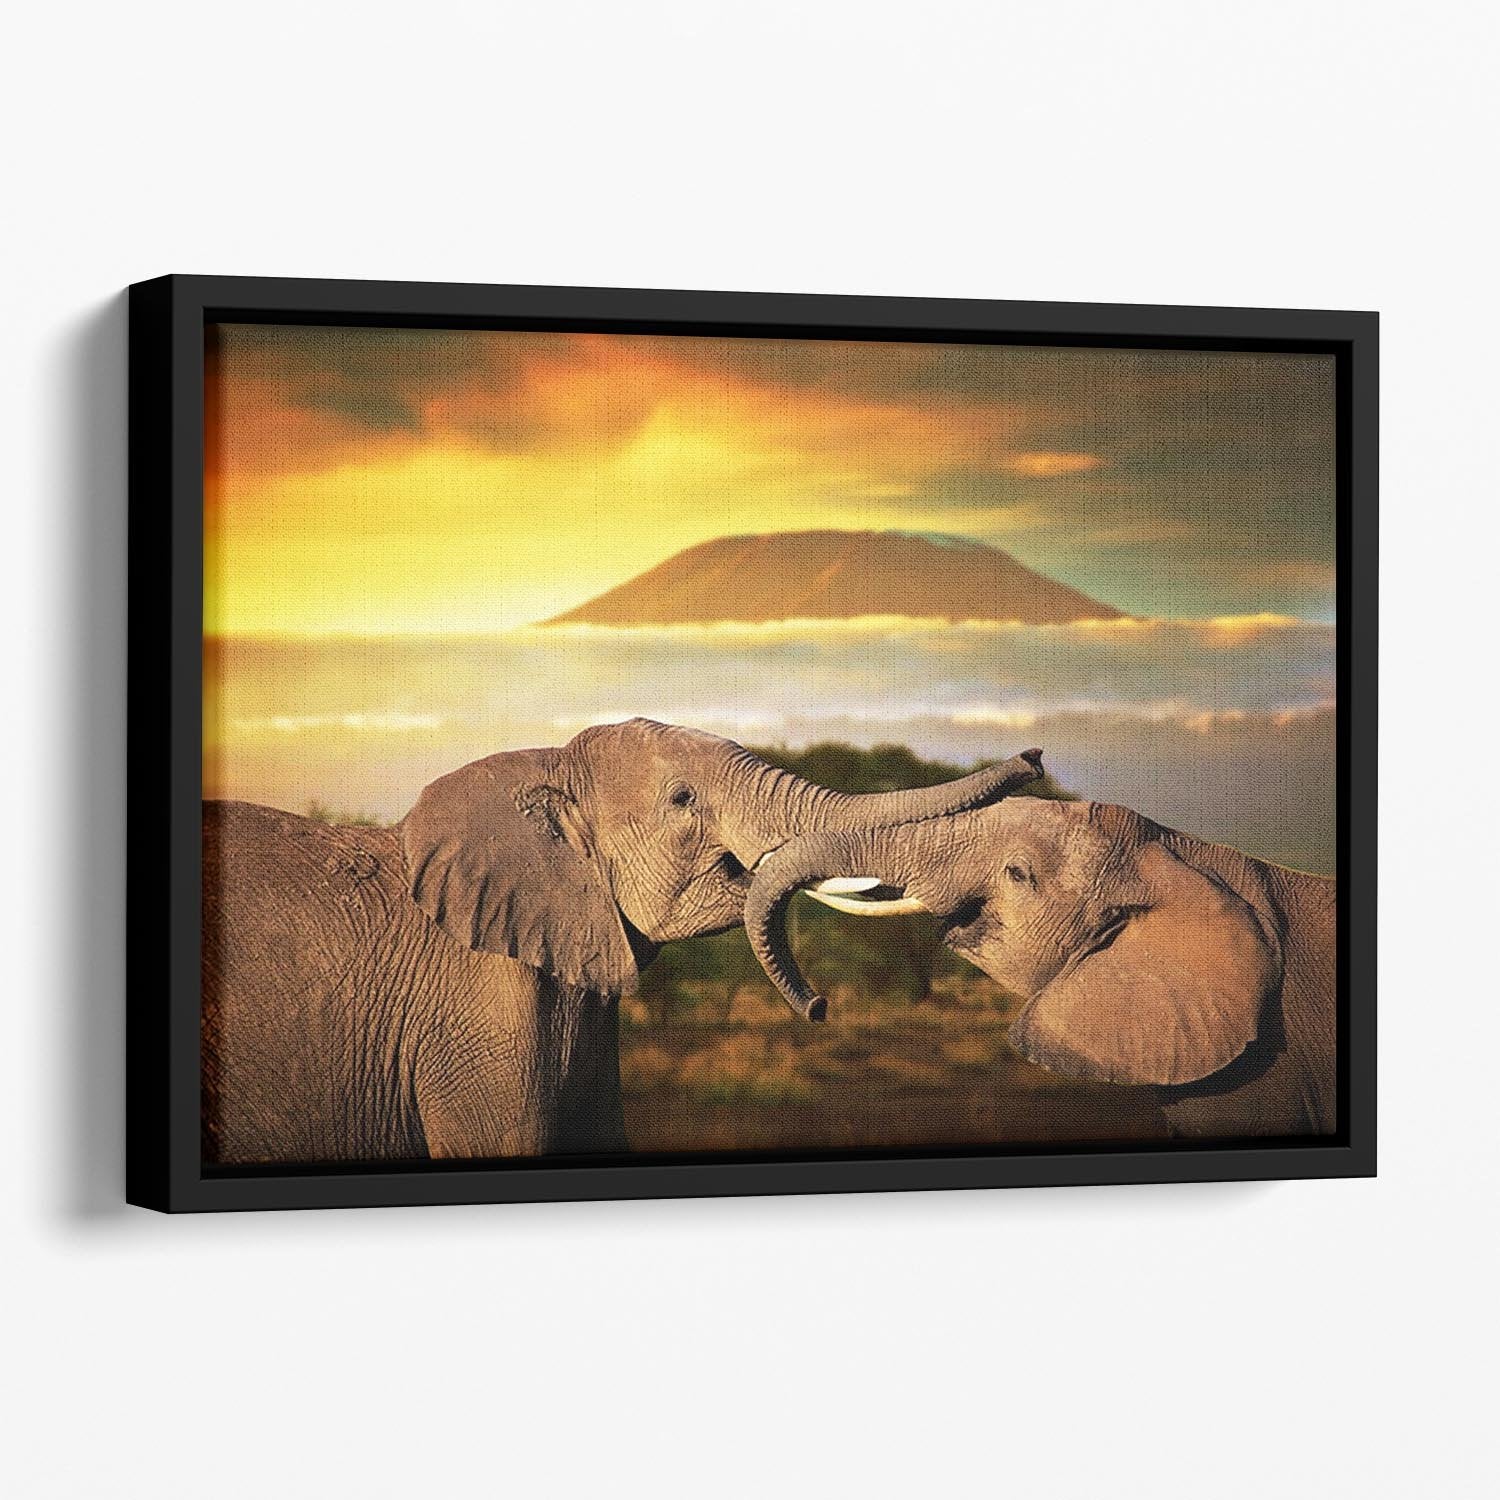 Elephants playing with their trunks Floating Framed Canvas - Canvas Art Rocks - 1